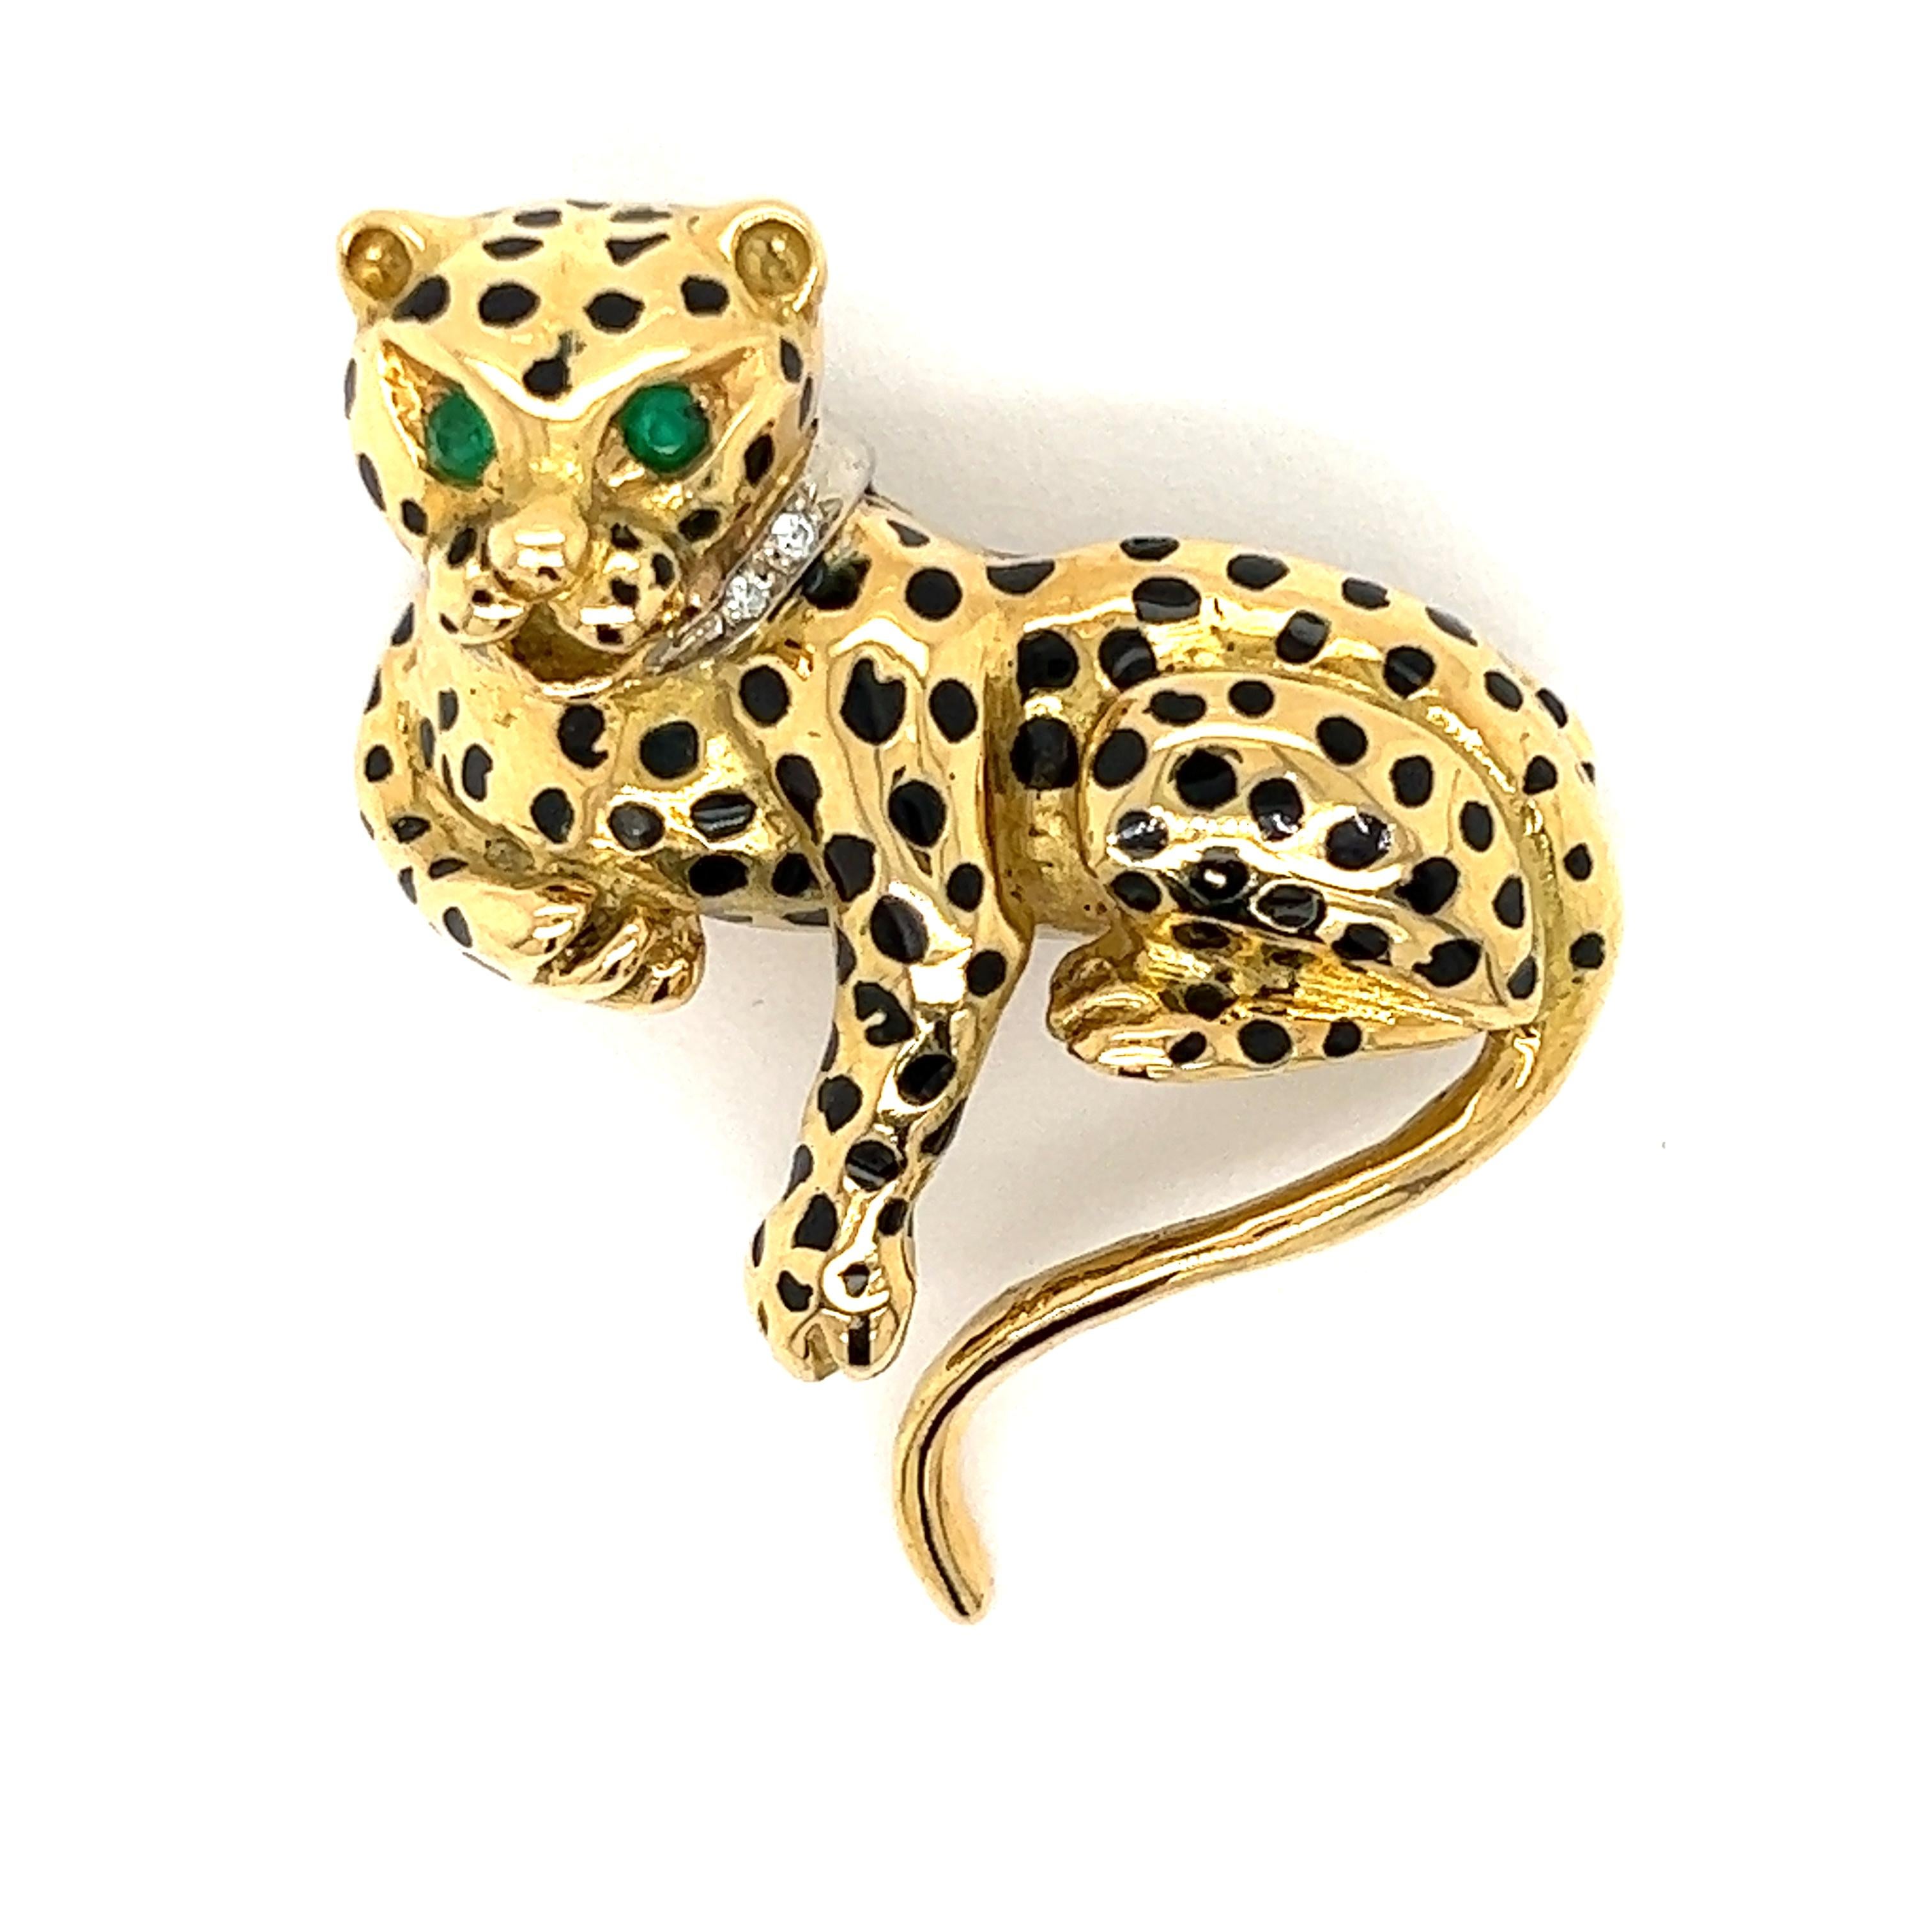 Round Cut Vintage Emerald and Black Enamel Cougar Brooch in 18Kt Yellow Gold